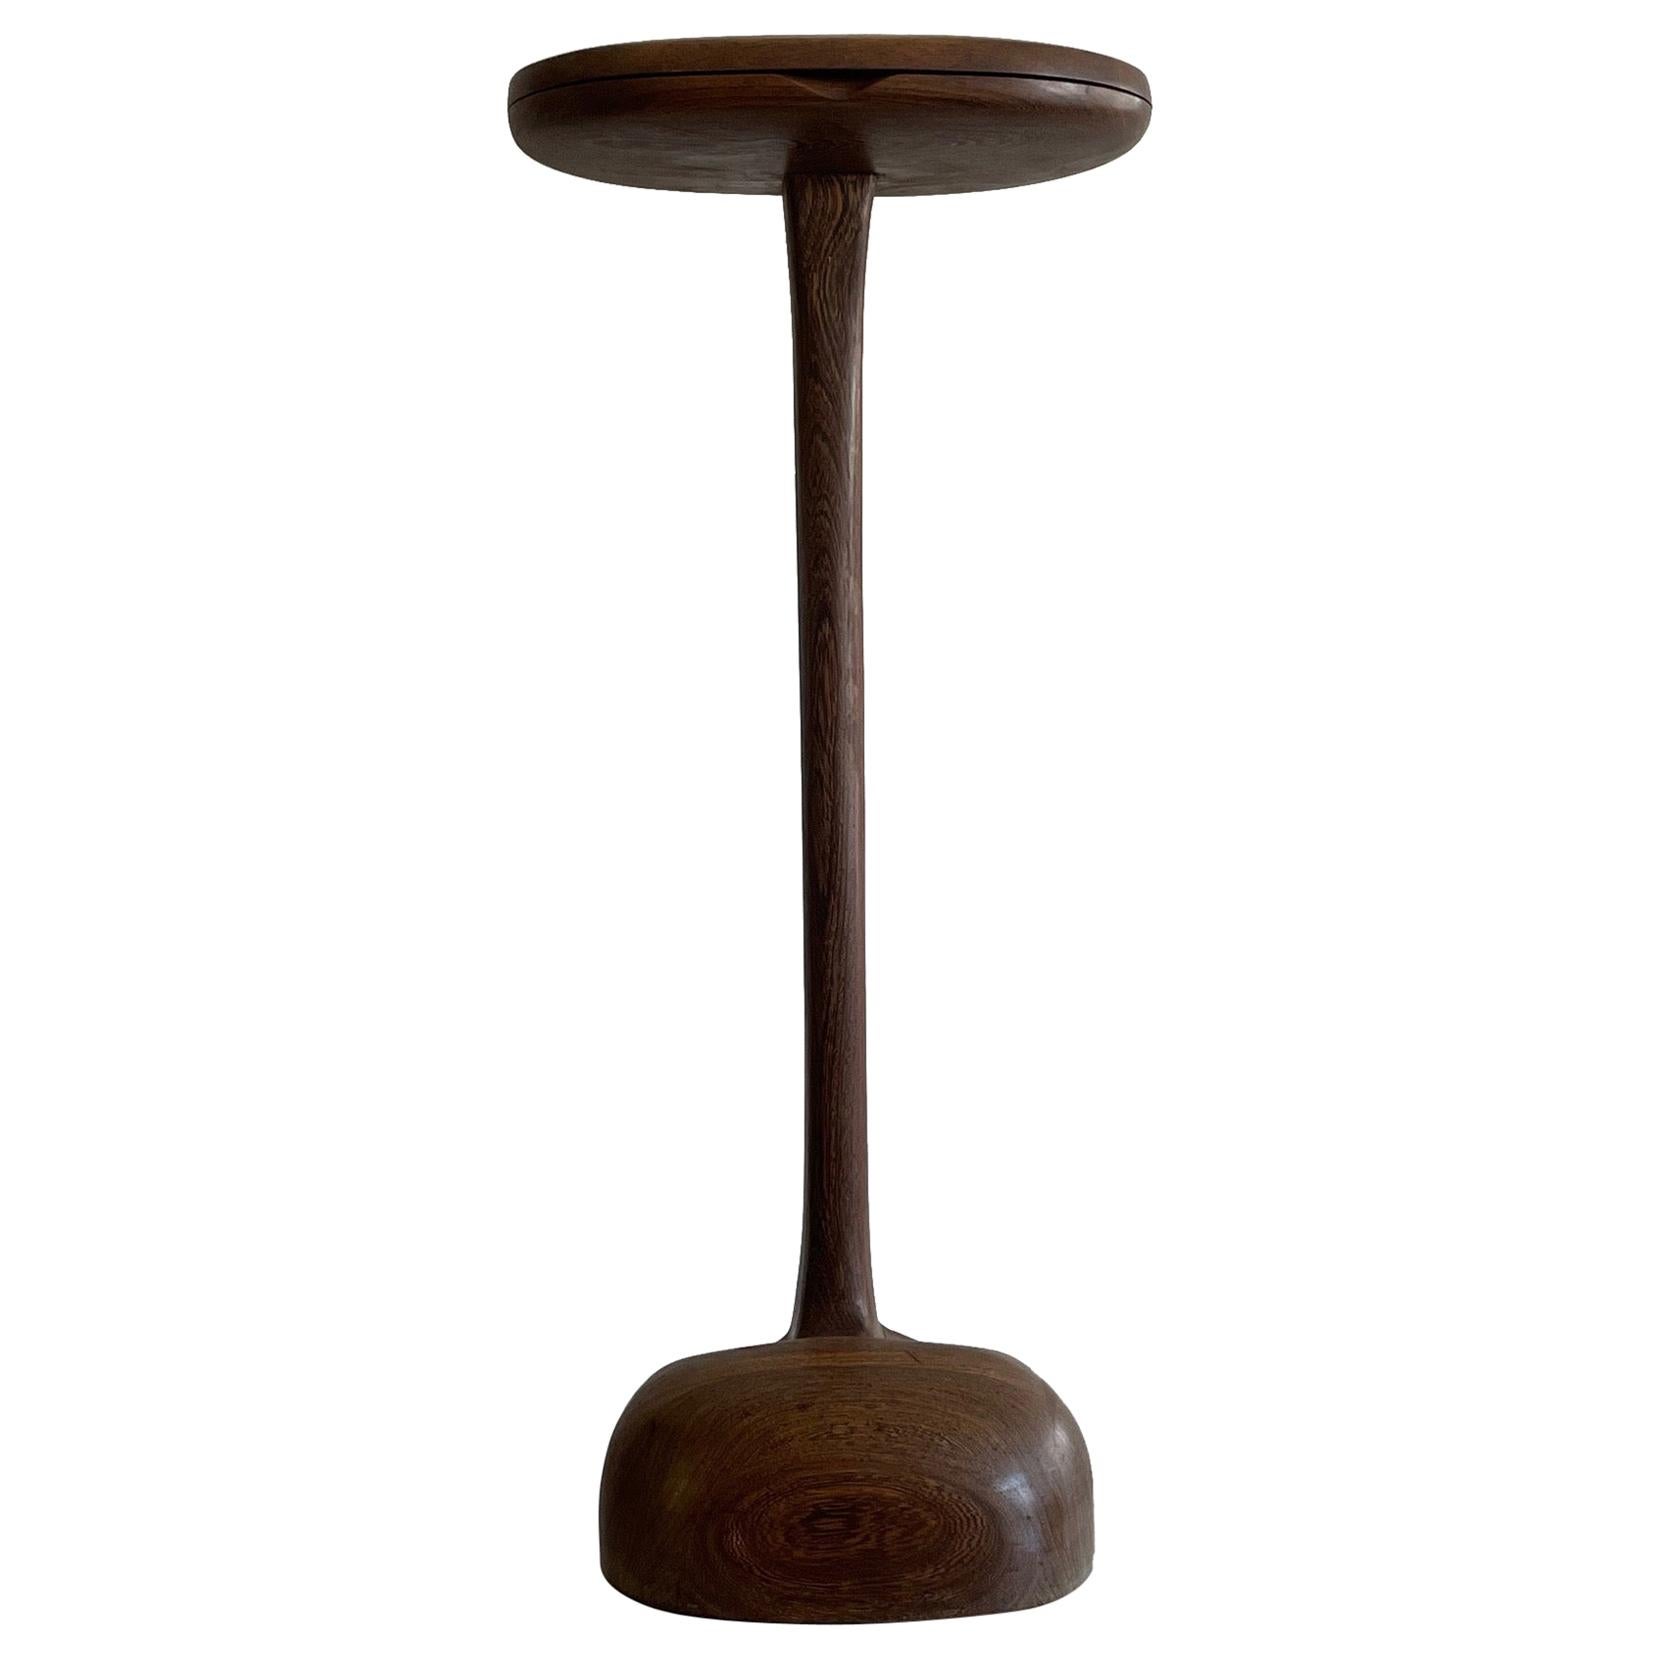 Lee Rohde Sculptural Lectern Form in Wengé, 1970 For Sale